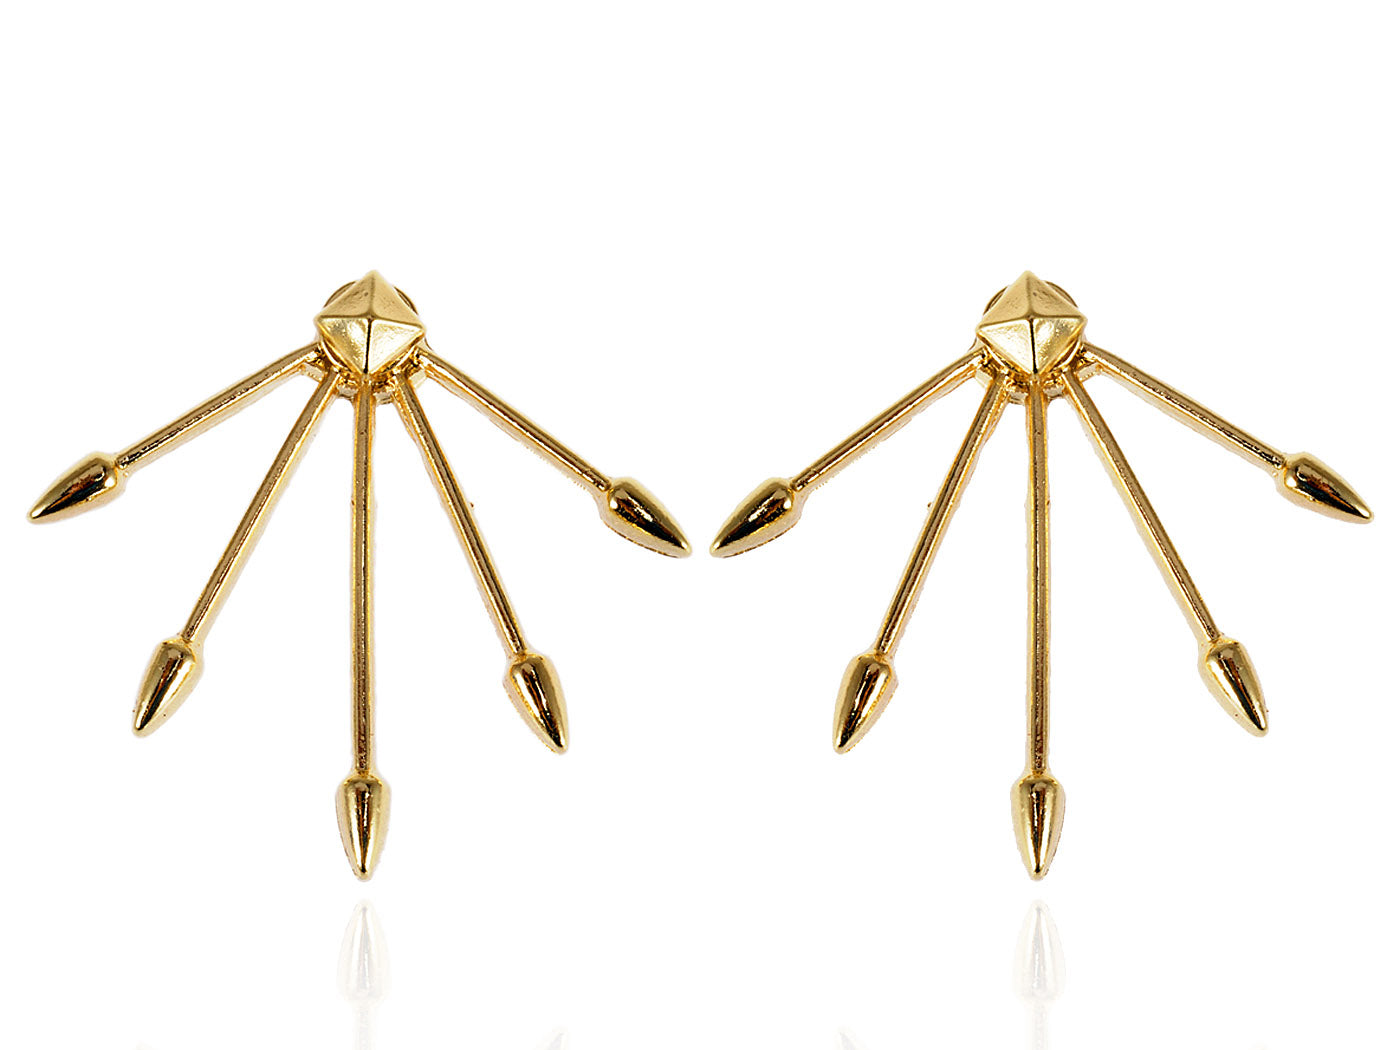 Contemporary Five Joint Uneven Arrow Earrings